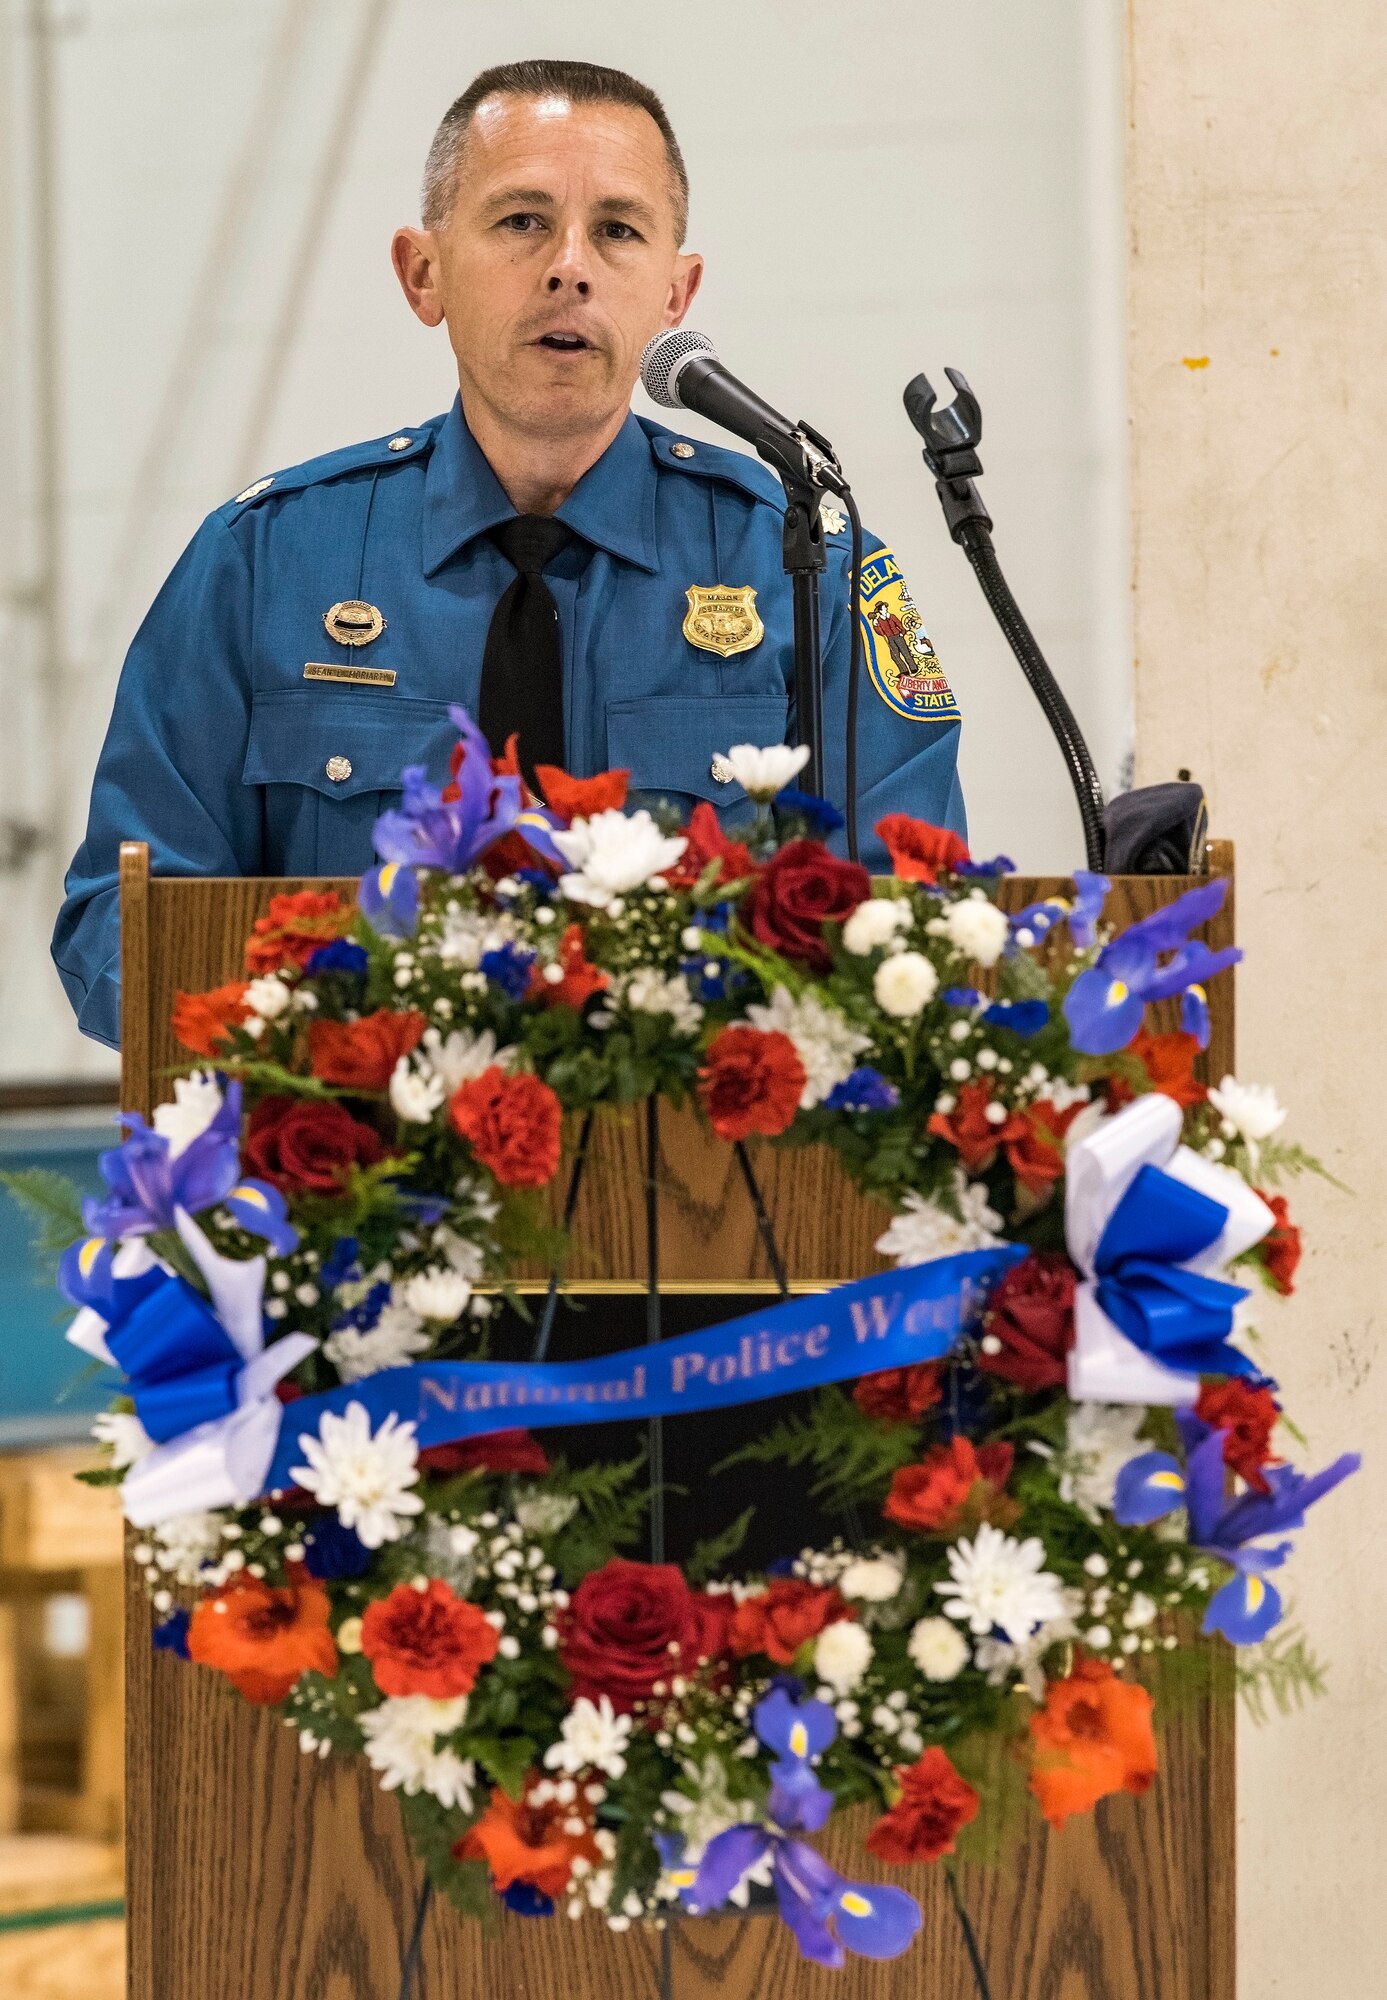 Maj. Sean Moriarty, Delaware State Police operations officer for Delaware’s Kent and Sussex Counties, speaks to attendees at the National Police Week Remembrance Ceremony May 18, 2018, at Dover Air Force Base, Del. The 436th Security Forces Squadron hosted numerous events in recognition of National Police Week. (U.S. Air Force photo by Roland Balik)